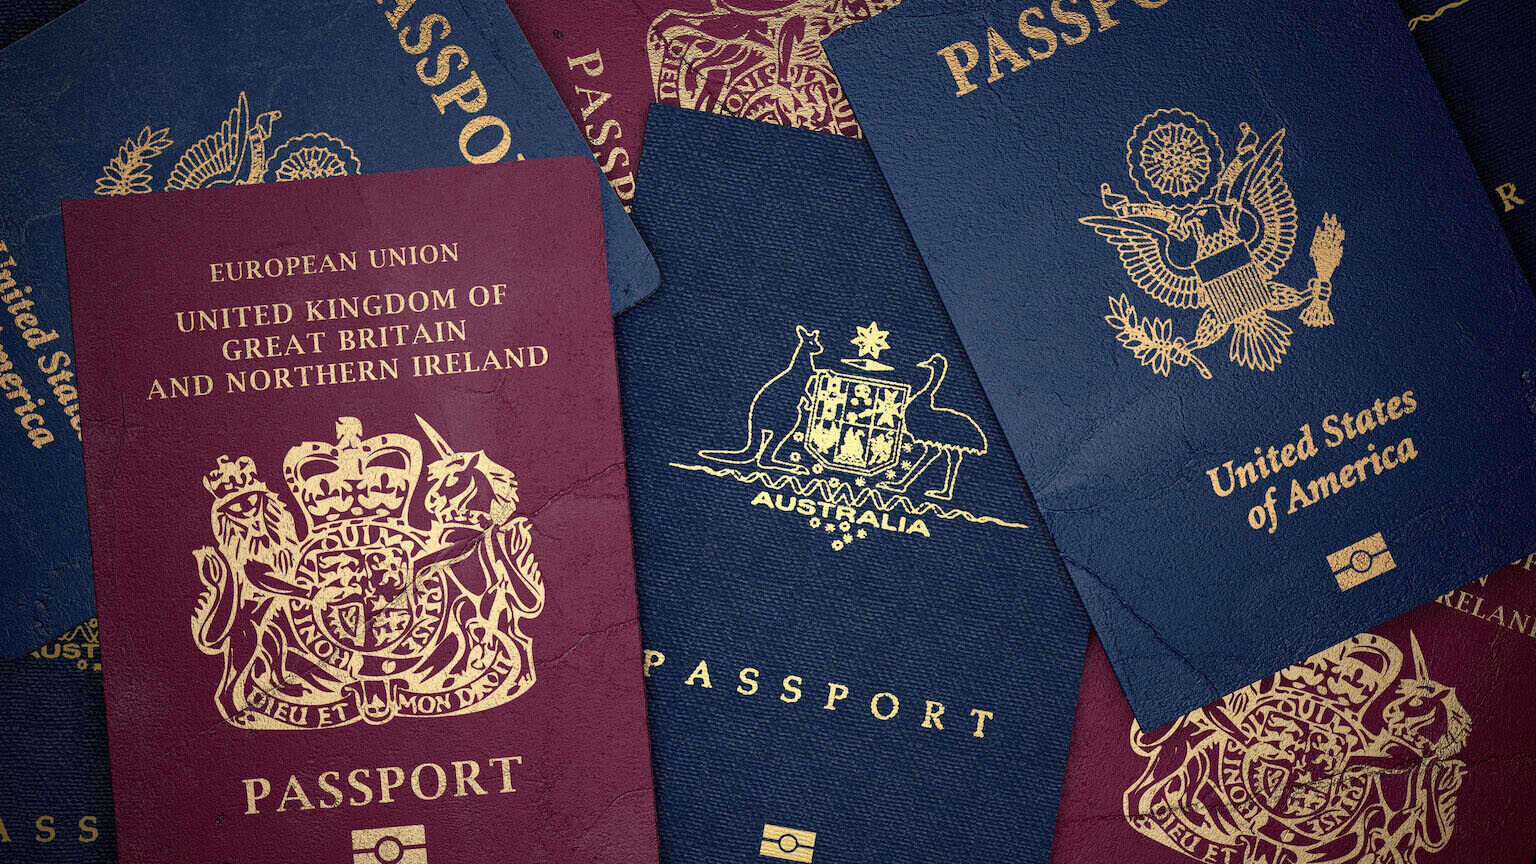 Travel is one of the most satisfying activities in the world. Discover how to obtain a dual passport here.